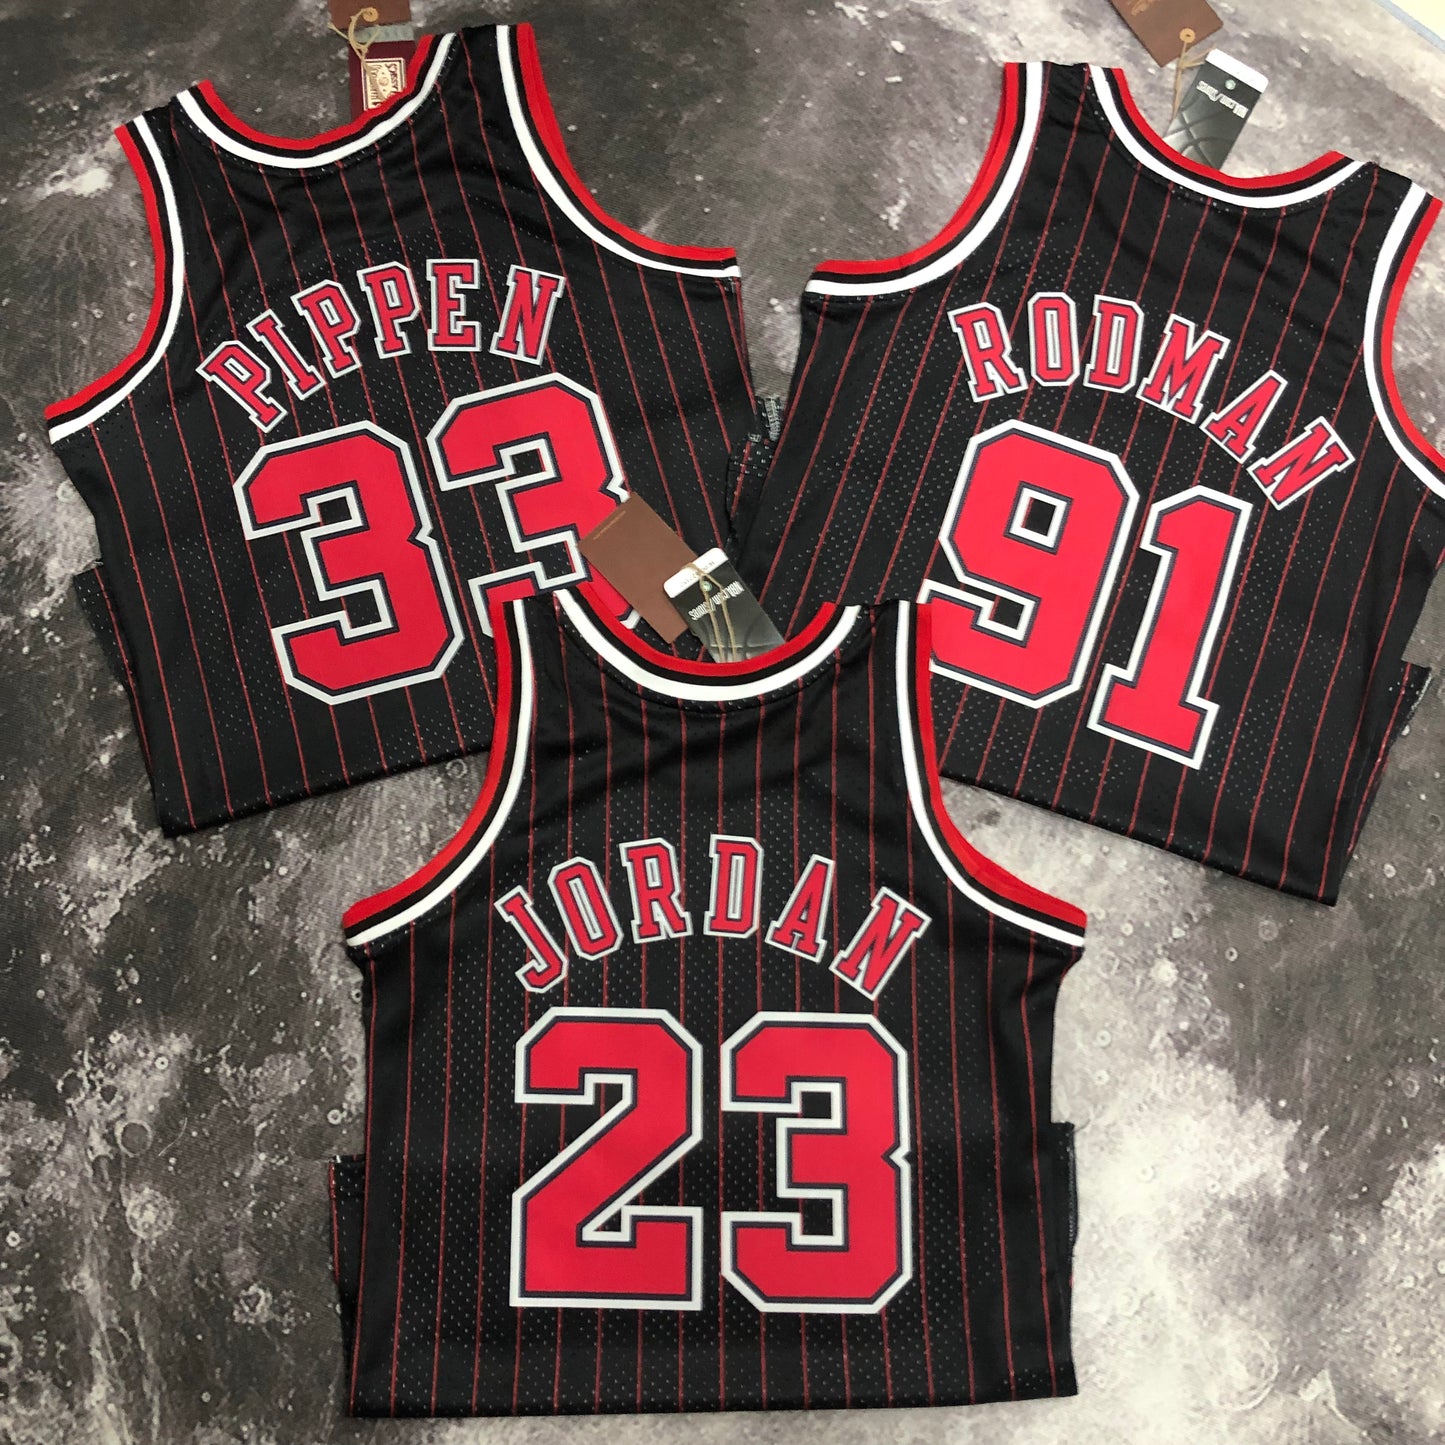 Chicago Bulls Black Finales 95 96 used